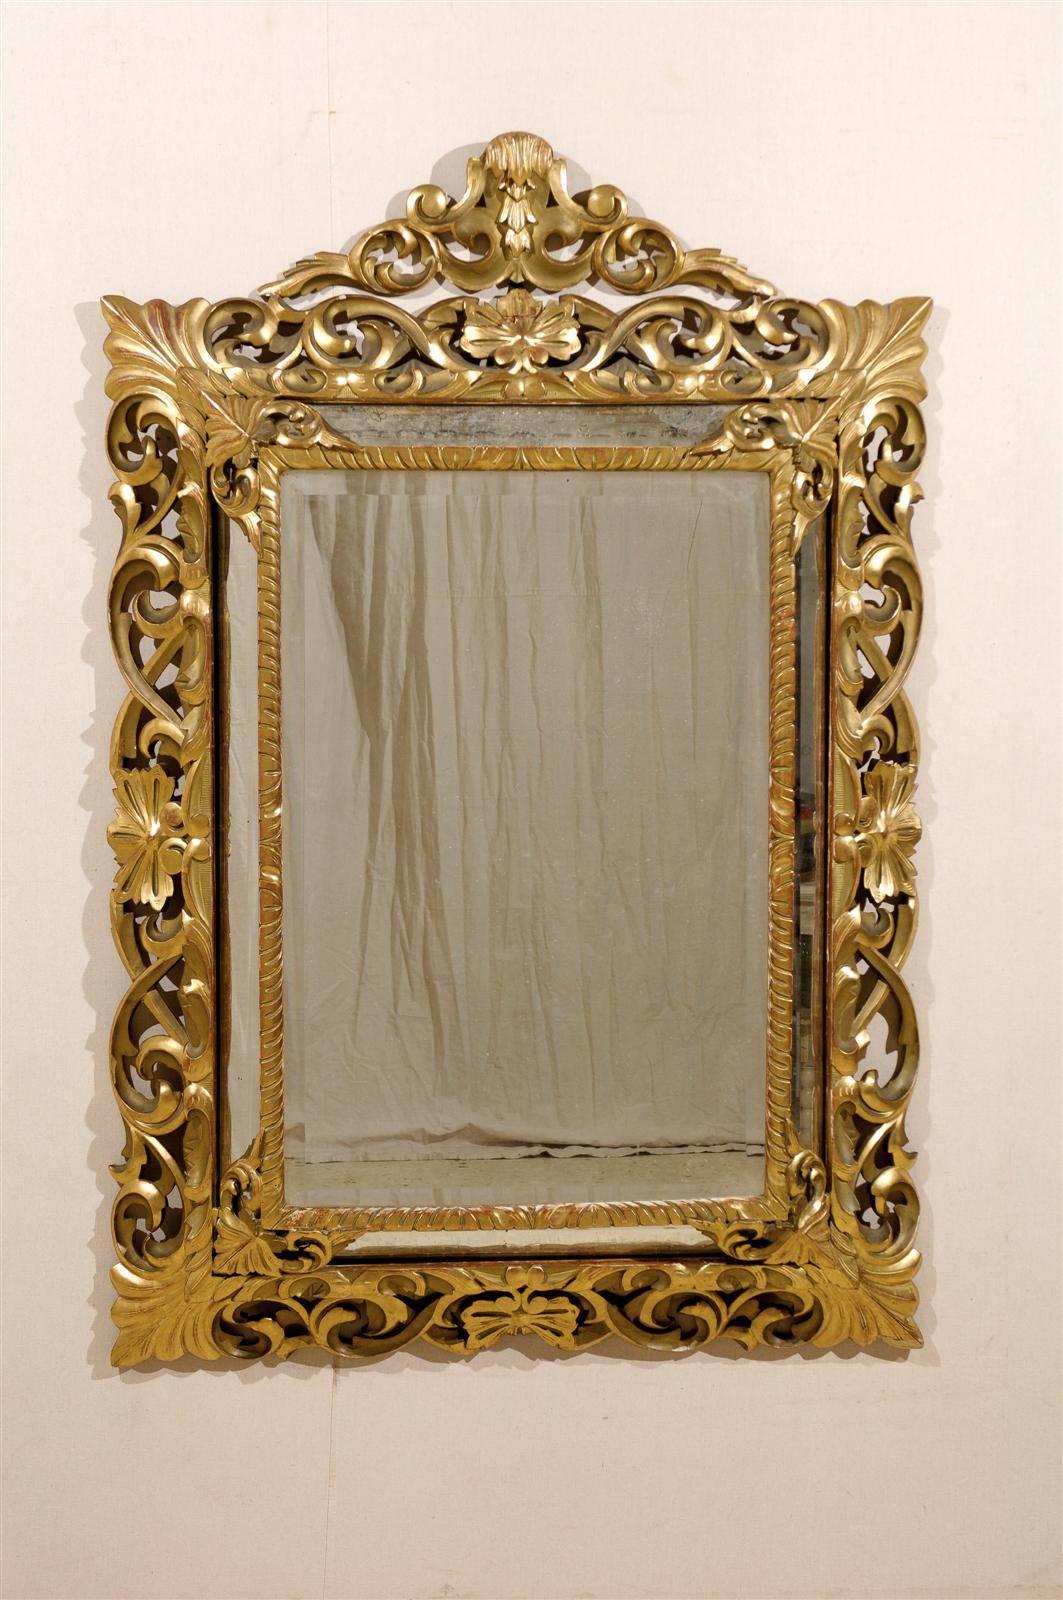 An exquisite Italian carved and gilded mirror from the 19th century. This ornate mirror features an intricately carved crest and a decor of rinceaux (foliage) in its frame. This mirror is a nice warm gold tone, with some deep red undertones